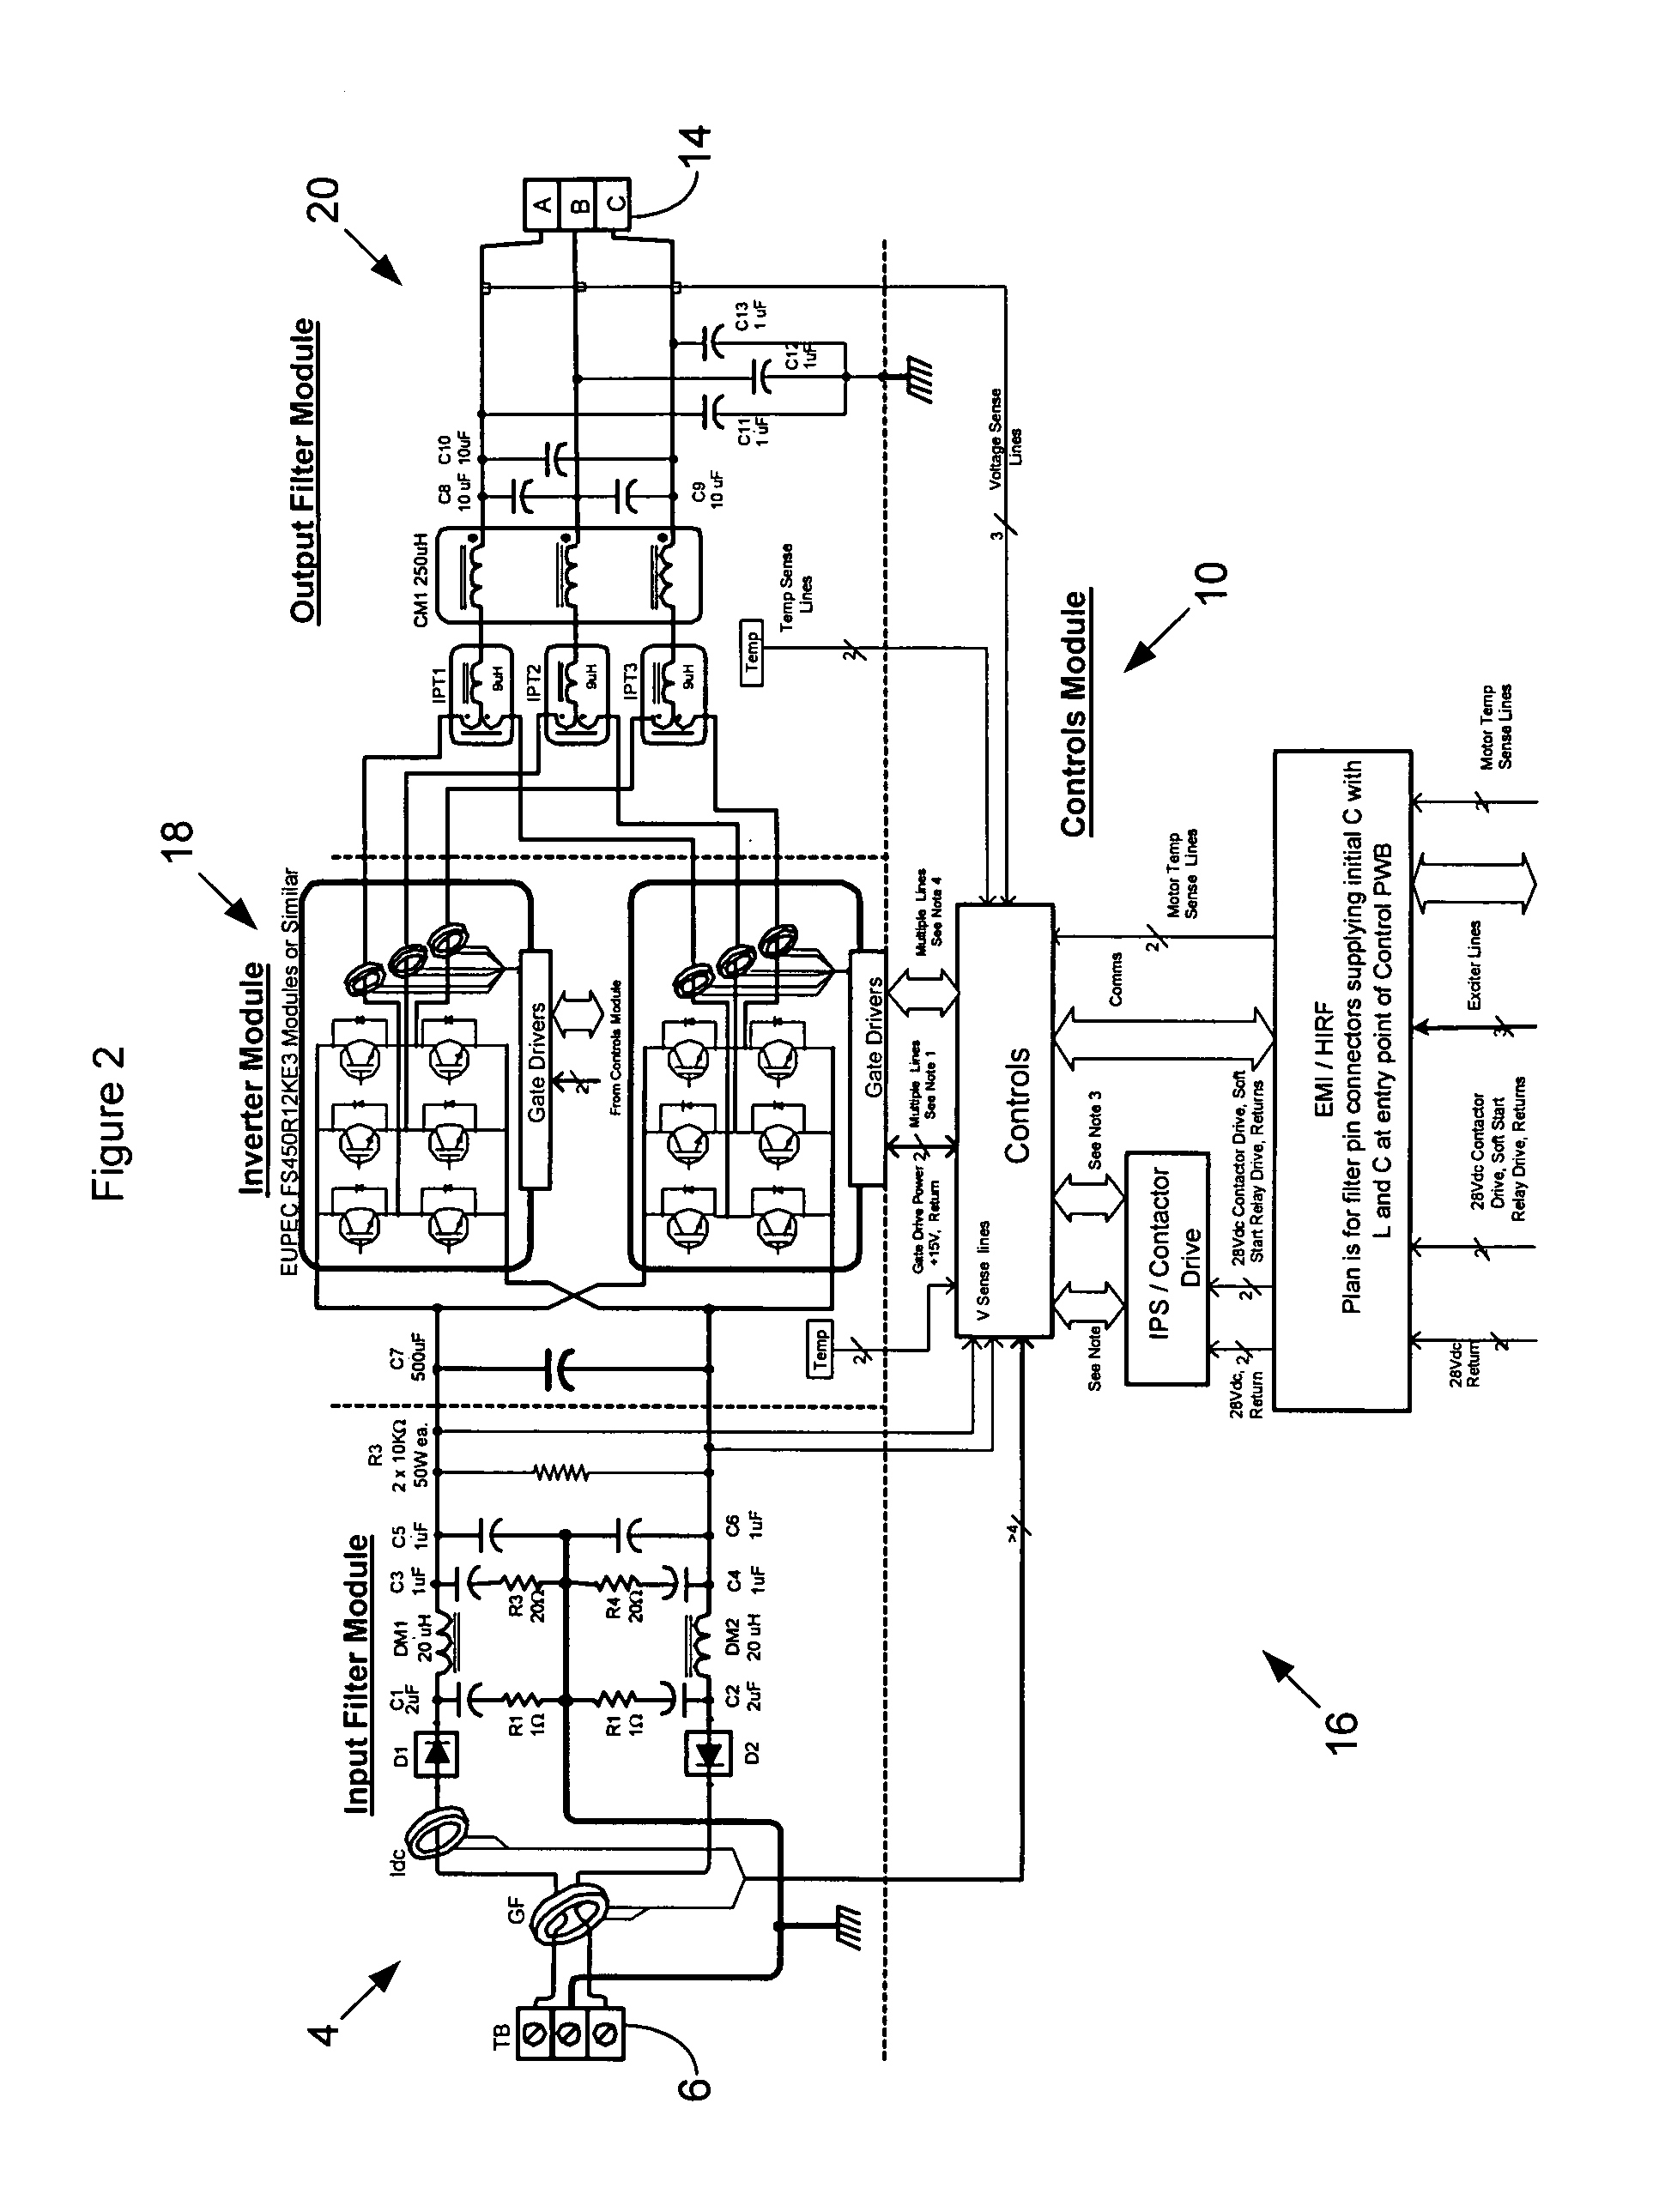 Parallel inverter motor drive with improved waveform and reduced filter requirements